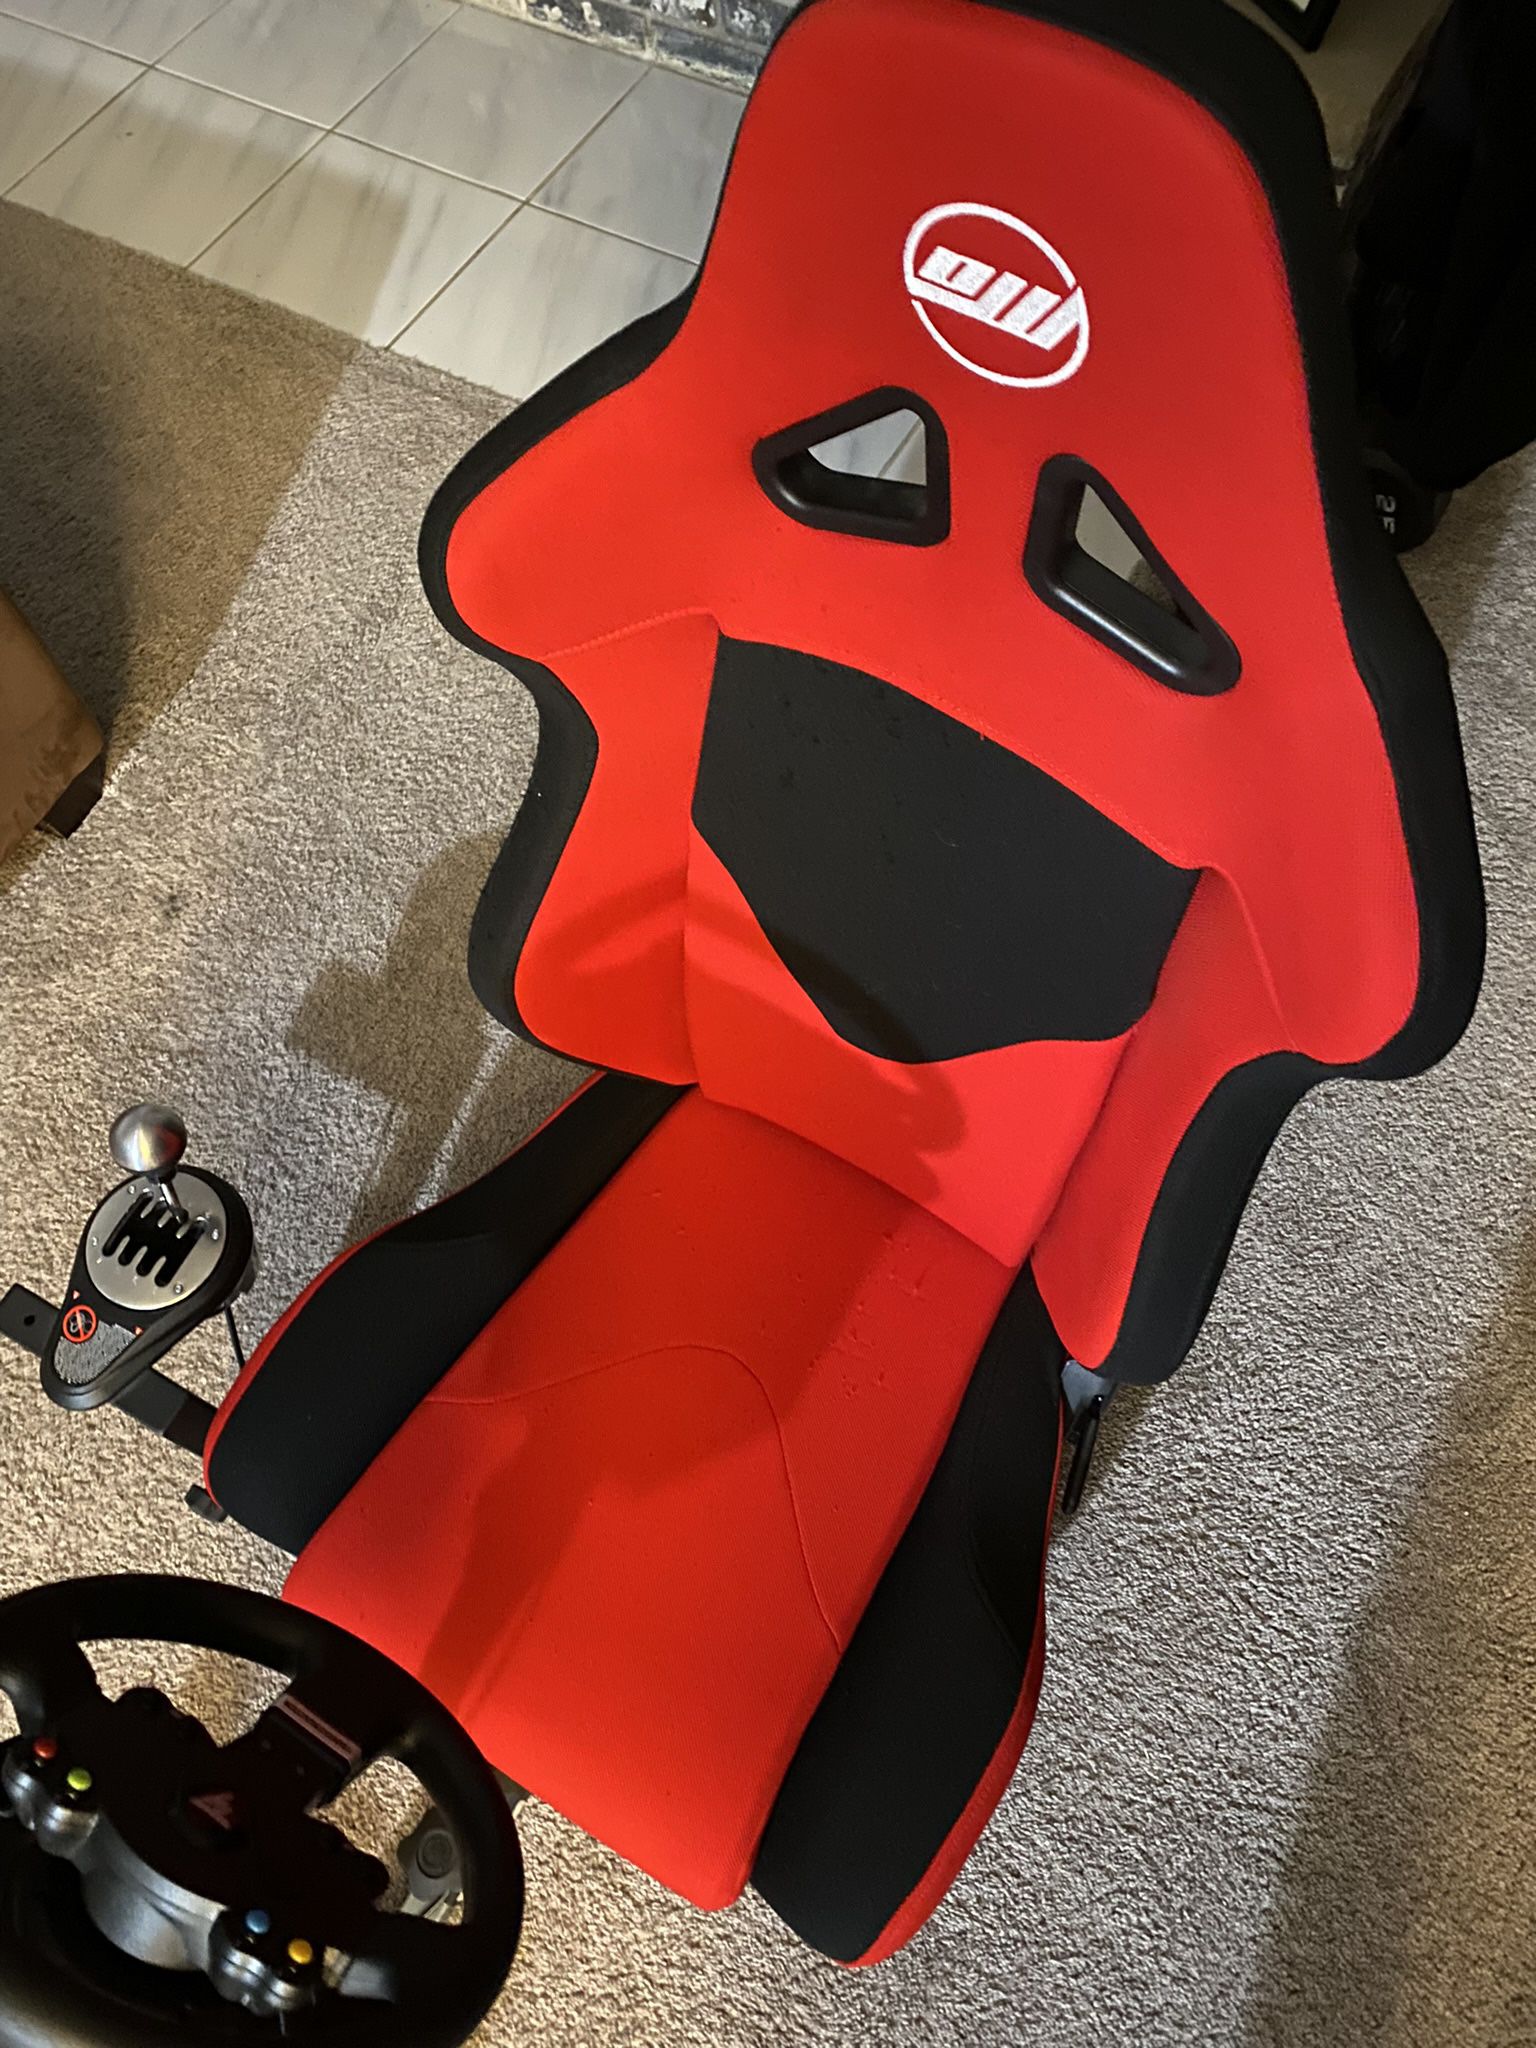 Racing Game Chair (adjustable)(chair only)